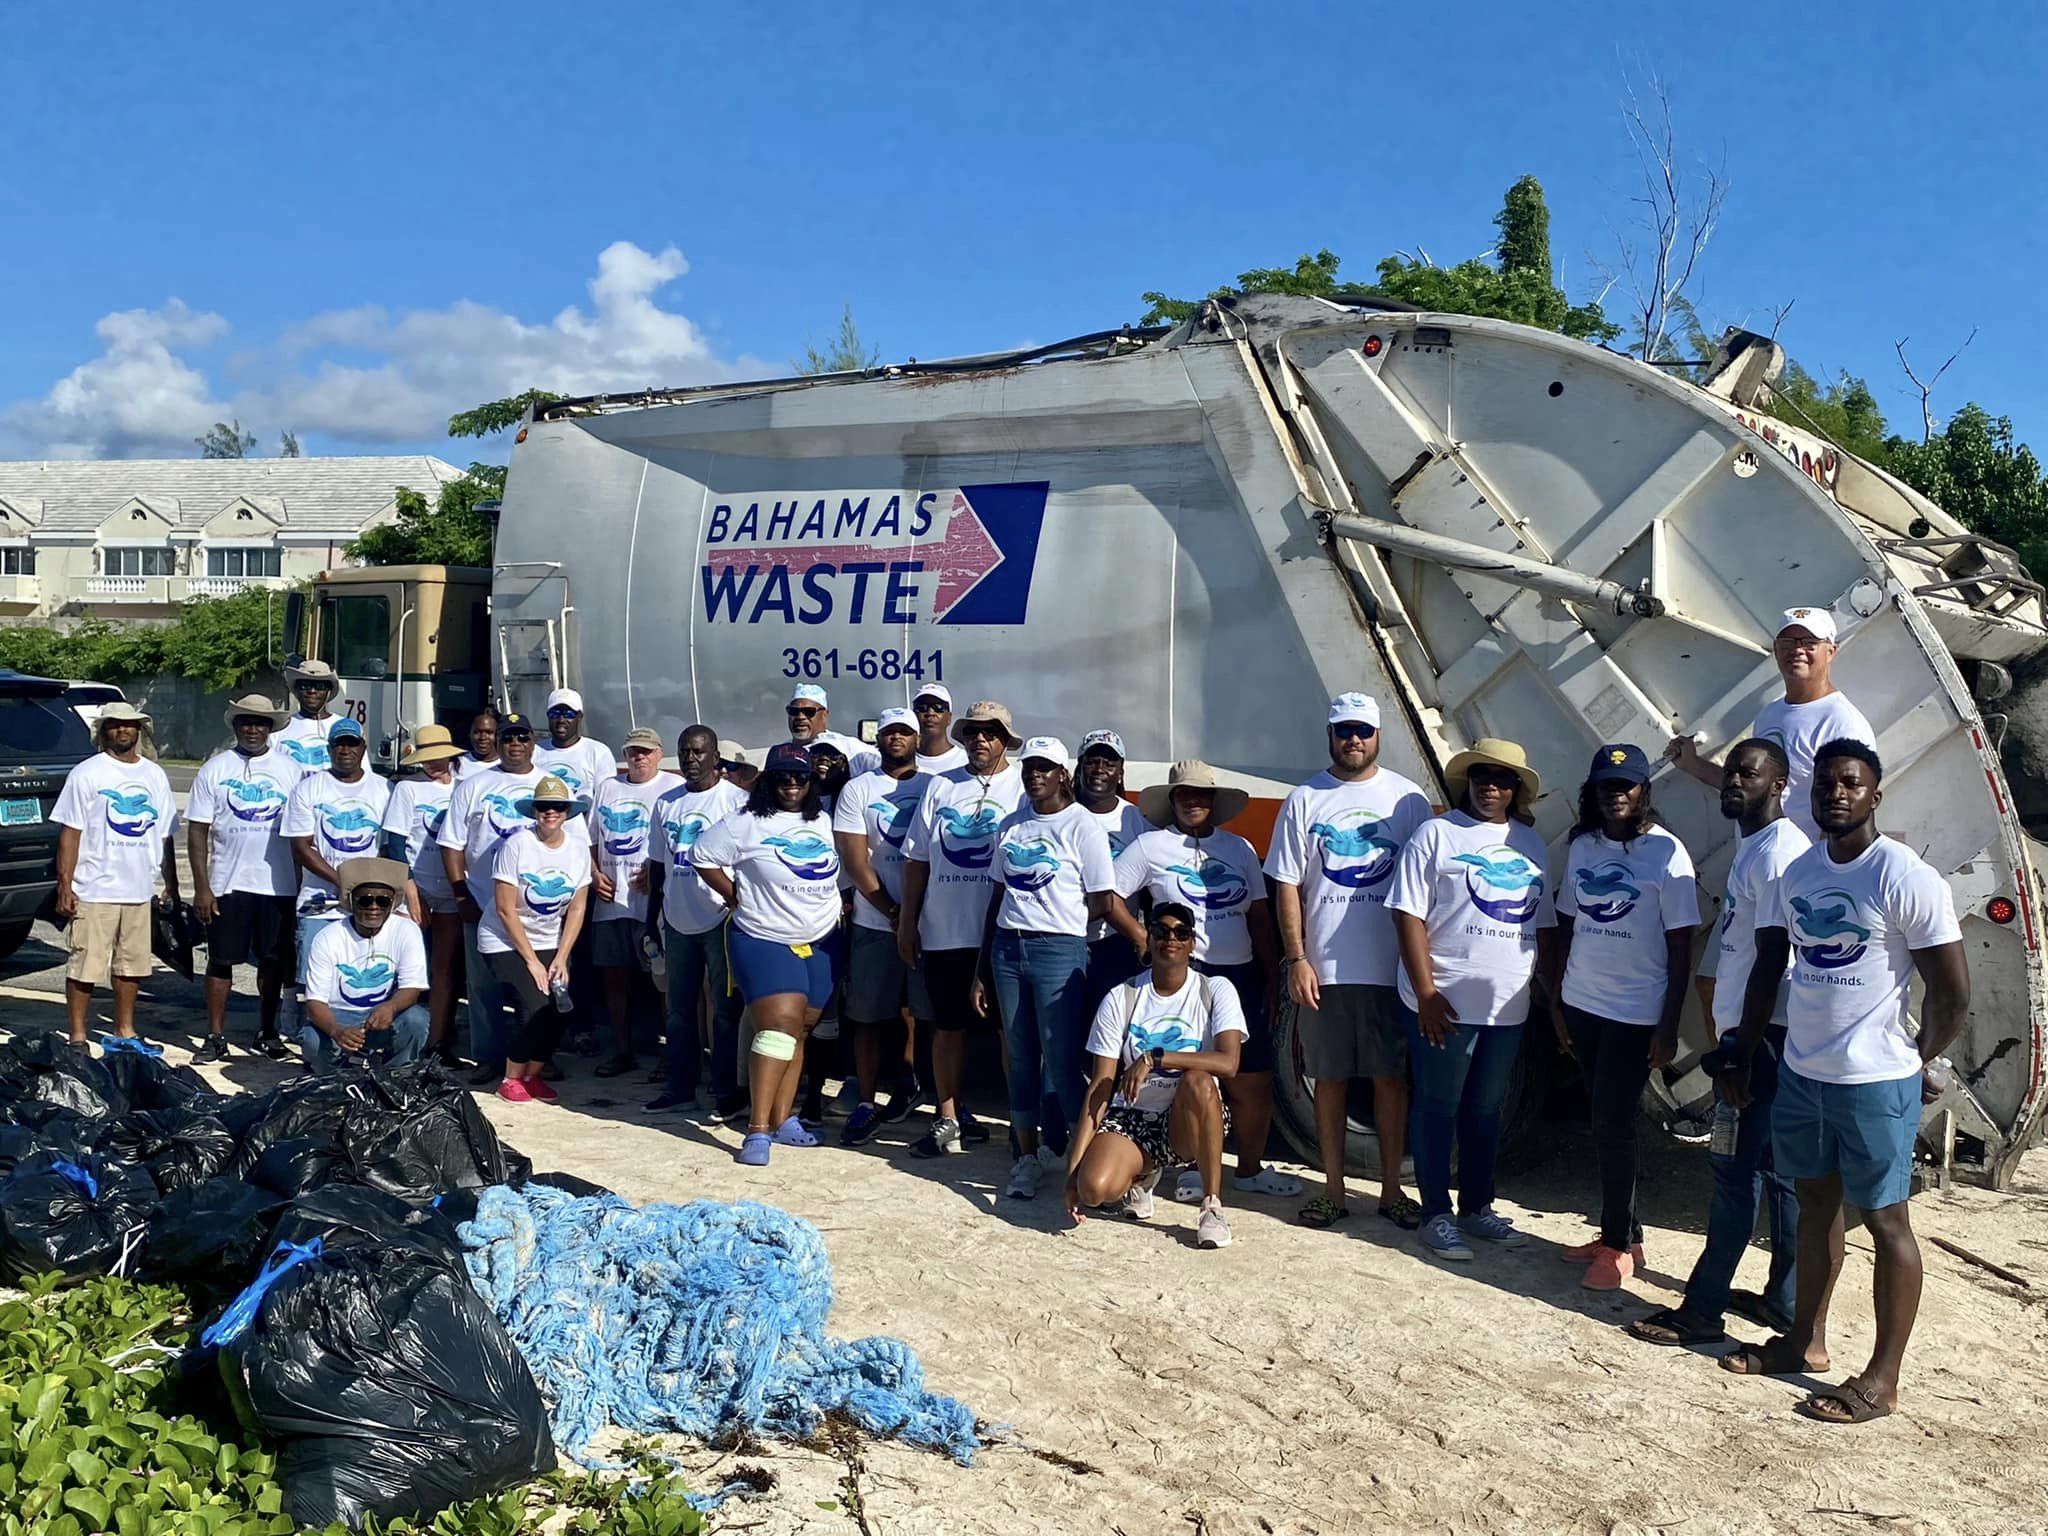 NASSAU CRUISE PORT LEADS BEACH CLEAN UP FOR INTERNATIONAL COASTAL CLEAN UP DAY